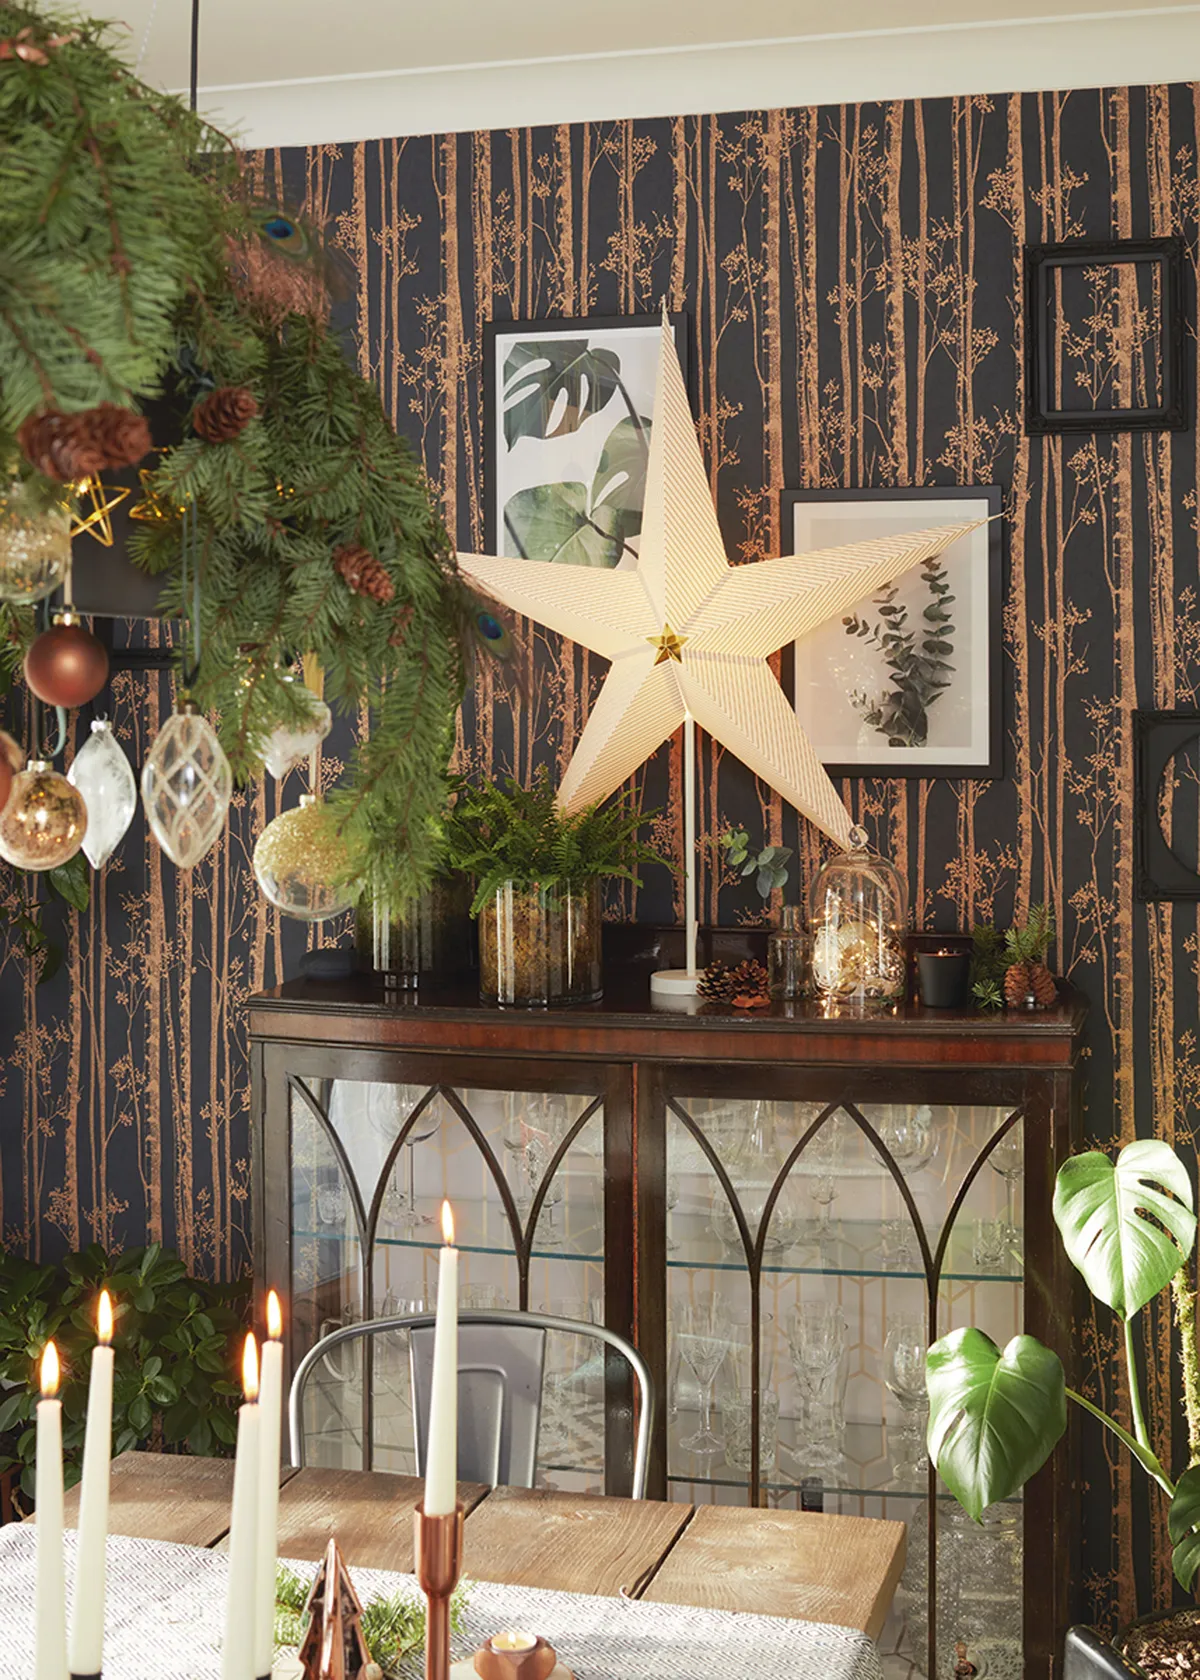 ’I try to recycle and use natural greenery as much as possible – it brings in that lovely Christmas smell,’ says Ediana. ‘This was the first wall I ever wallpapered and it’s my greatest DIY achievement. It wasn’t as difficult as I thought and it sits well with my glass cabinet I found in a charity shop’